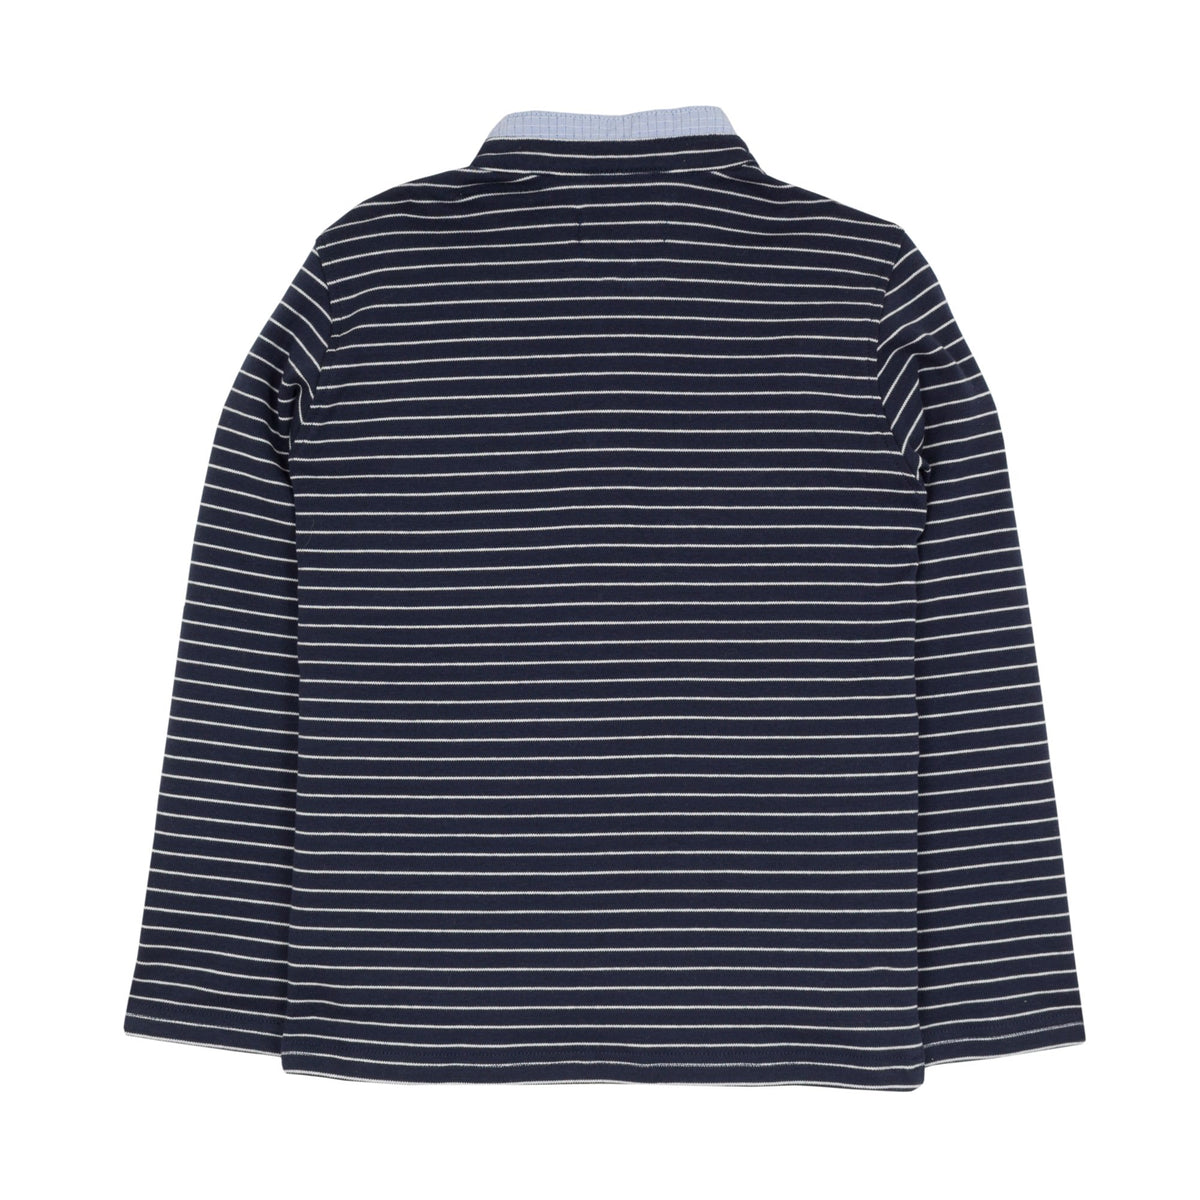 Jean Bourget navy blue long-sleeved polo shirt is punctuated with a sailor stripe. This classic look is twisted by a piped collar of light blue check fabric, matchin